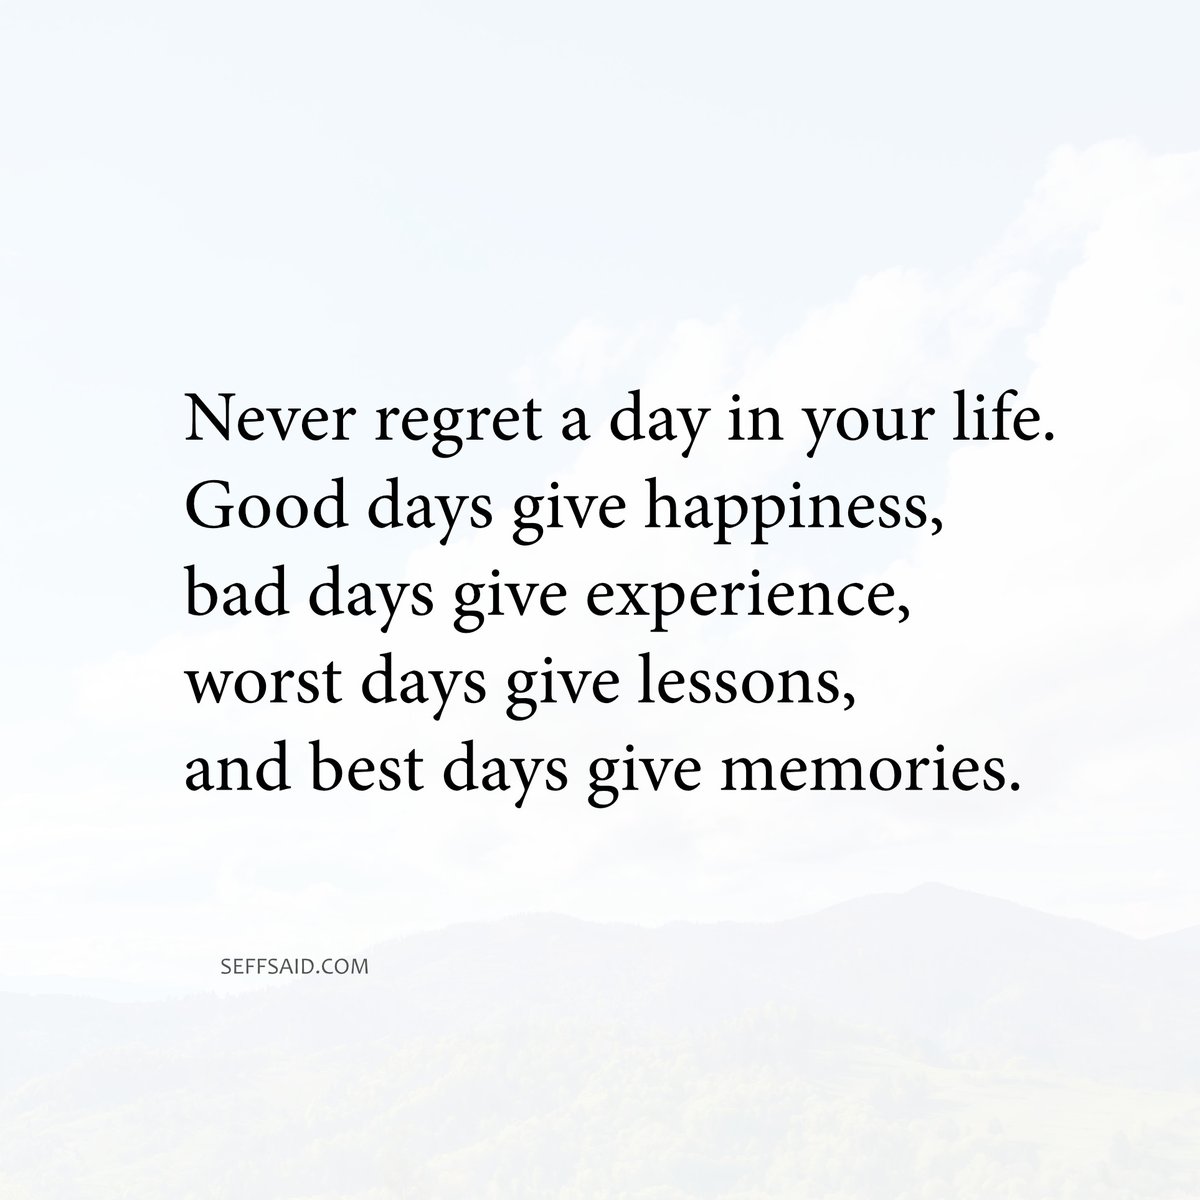 Never regret a day